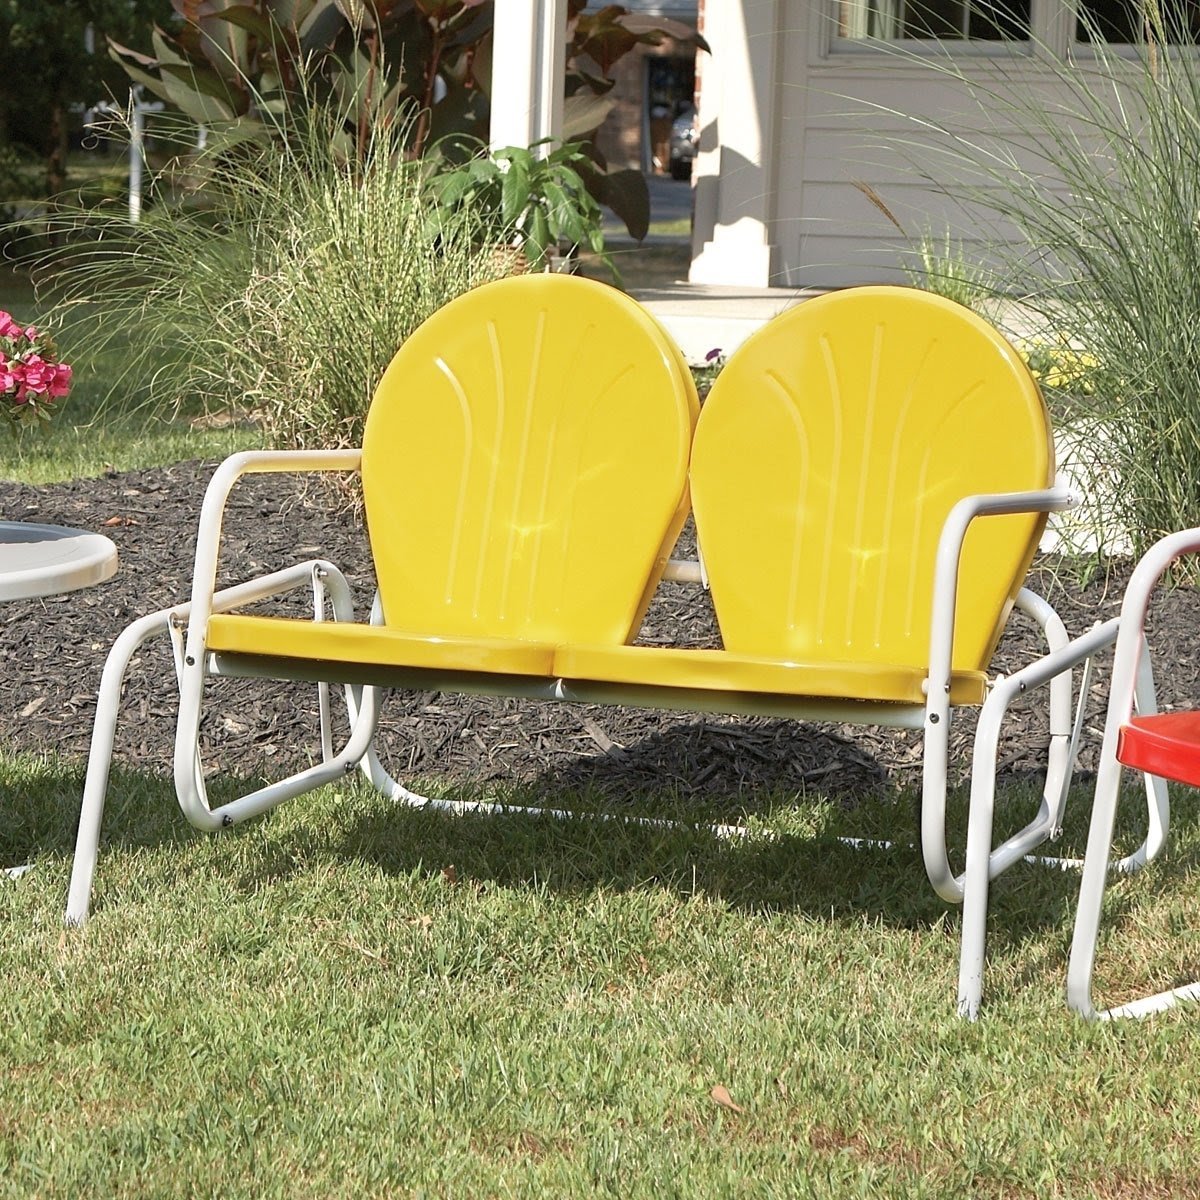 Vintage Metal Lawn Chairs Visualhunt, Antique Outdoor Metal Chairs